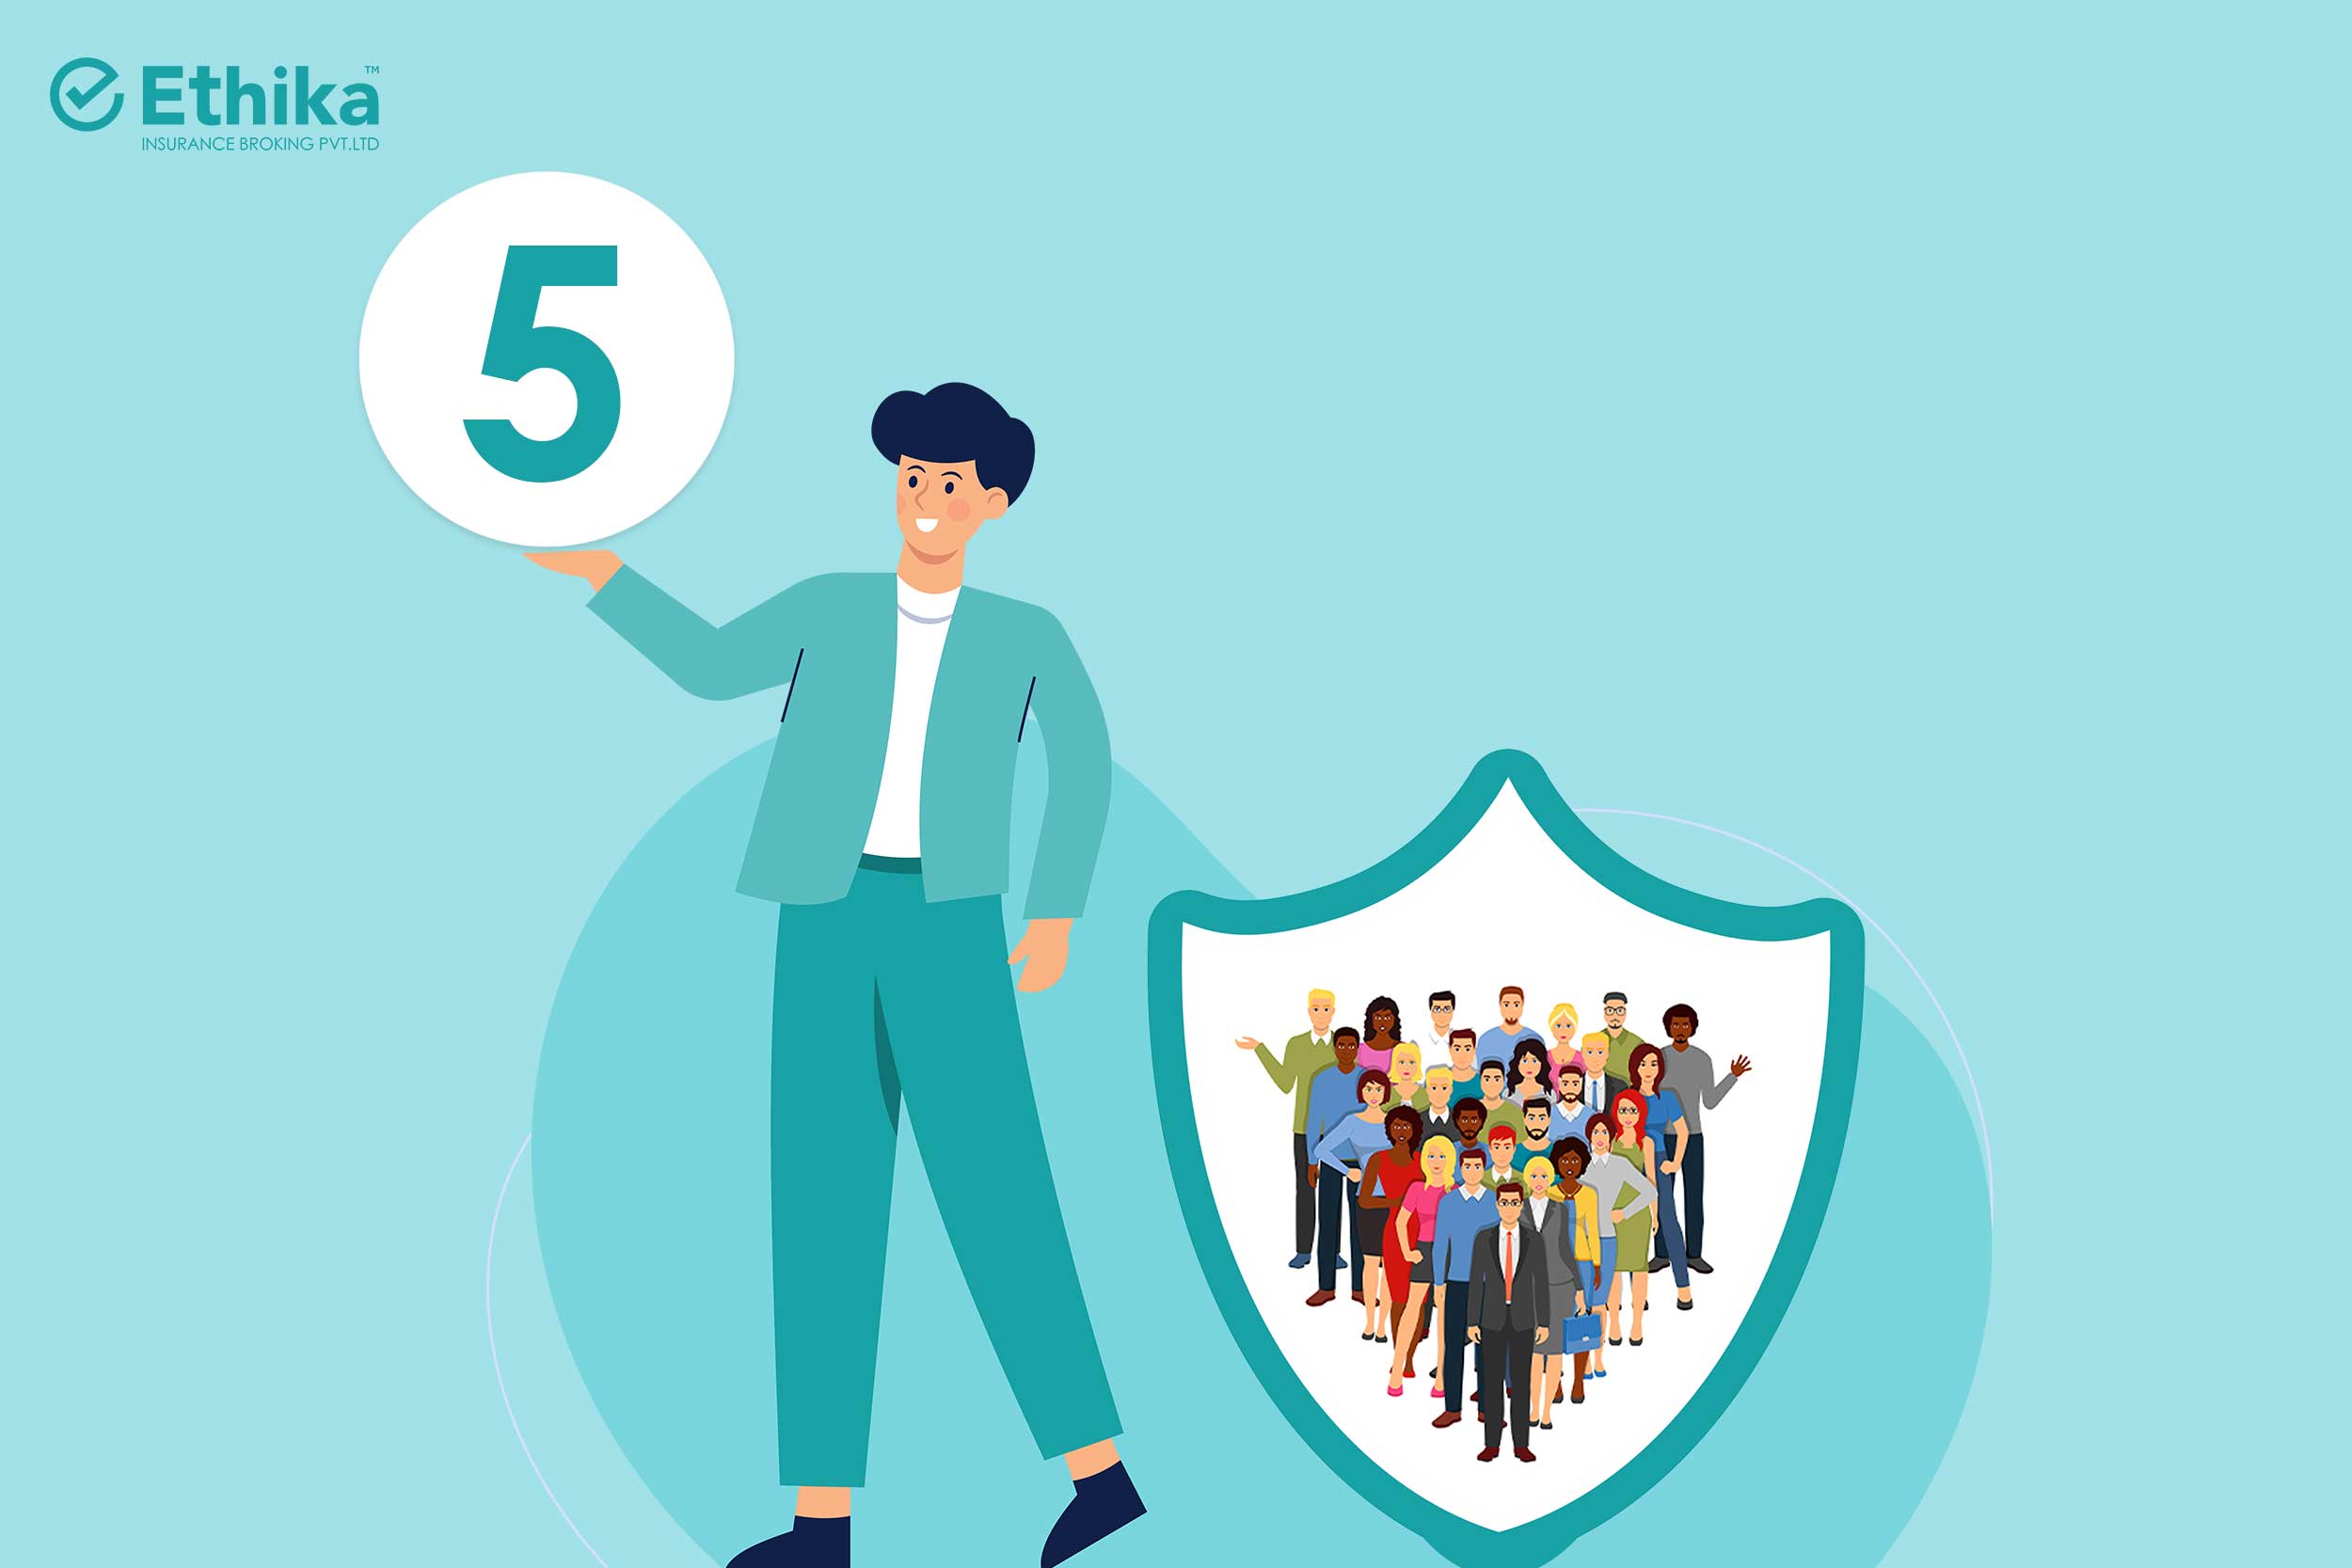 Reasons to offer group health insurance to employees: A vector image of a standing man with the number 5 as well as pictures of his peers in the shield.